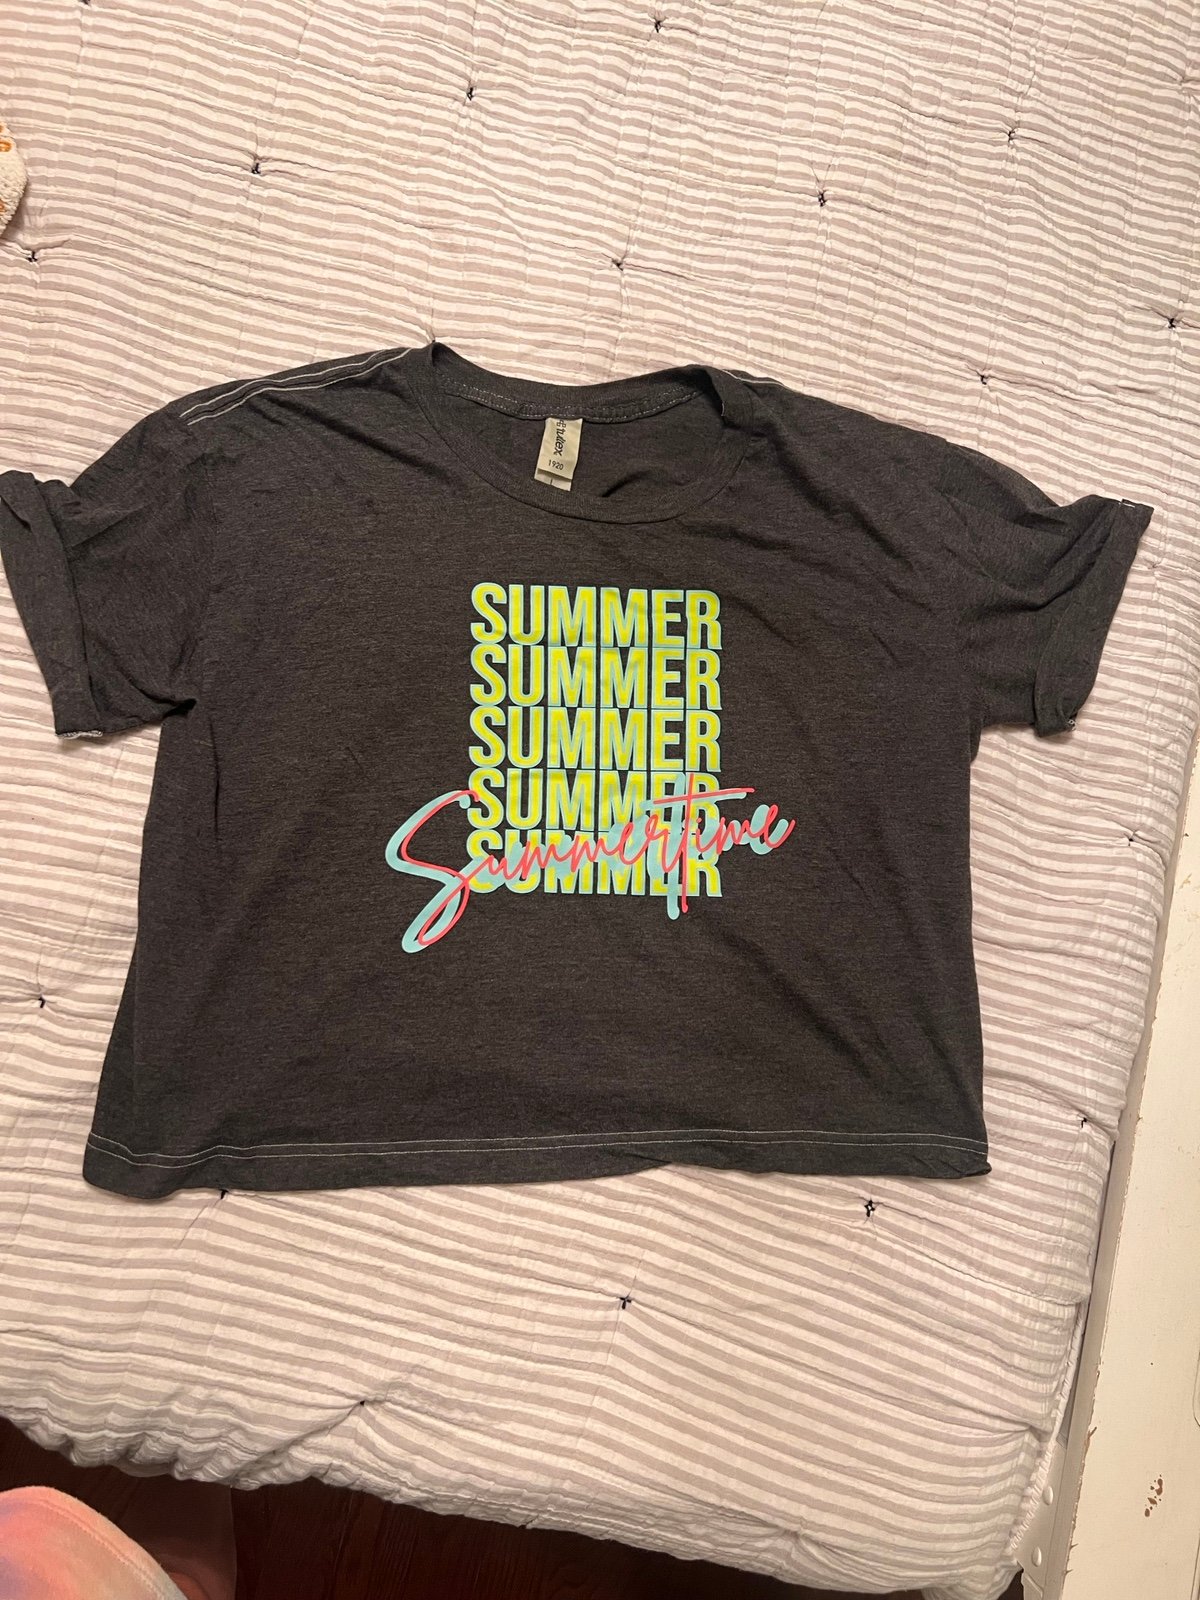 the Lowest price Boutique Summertime Crop Tee OEtW775vj Store Online